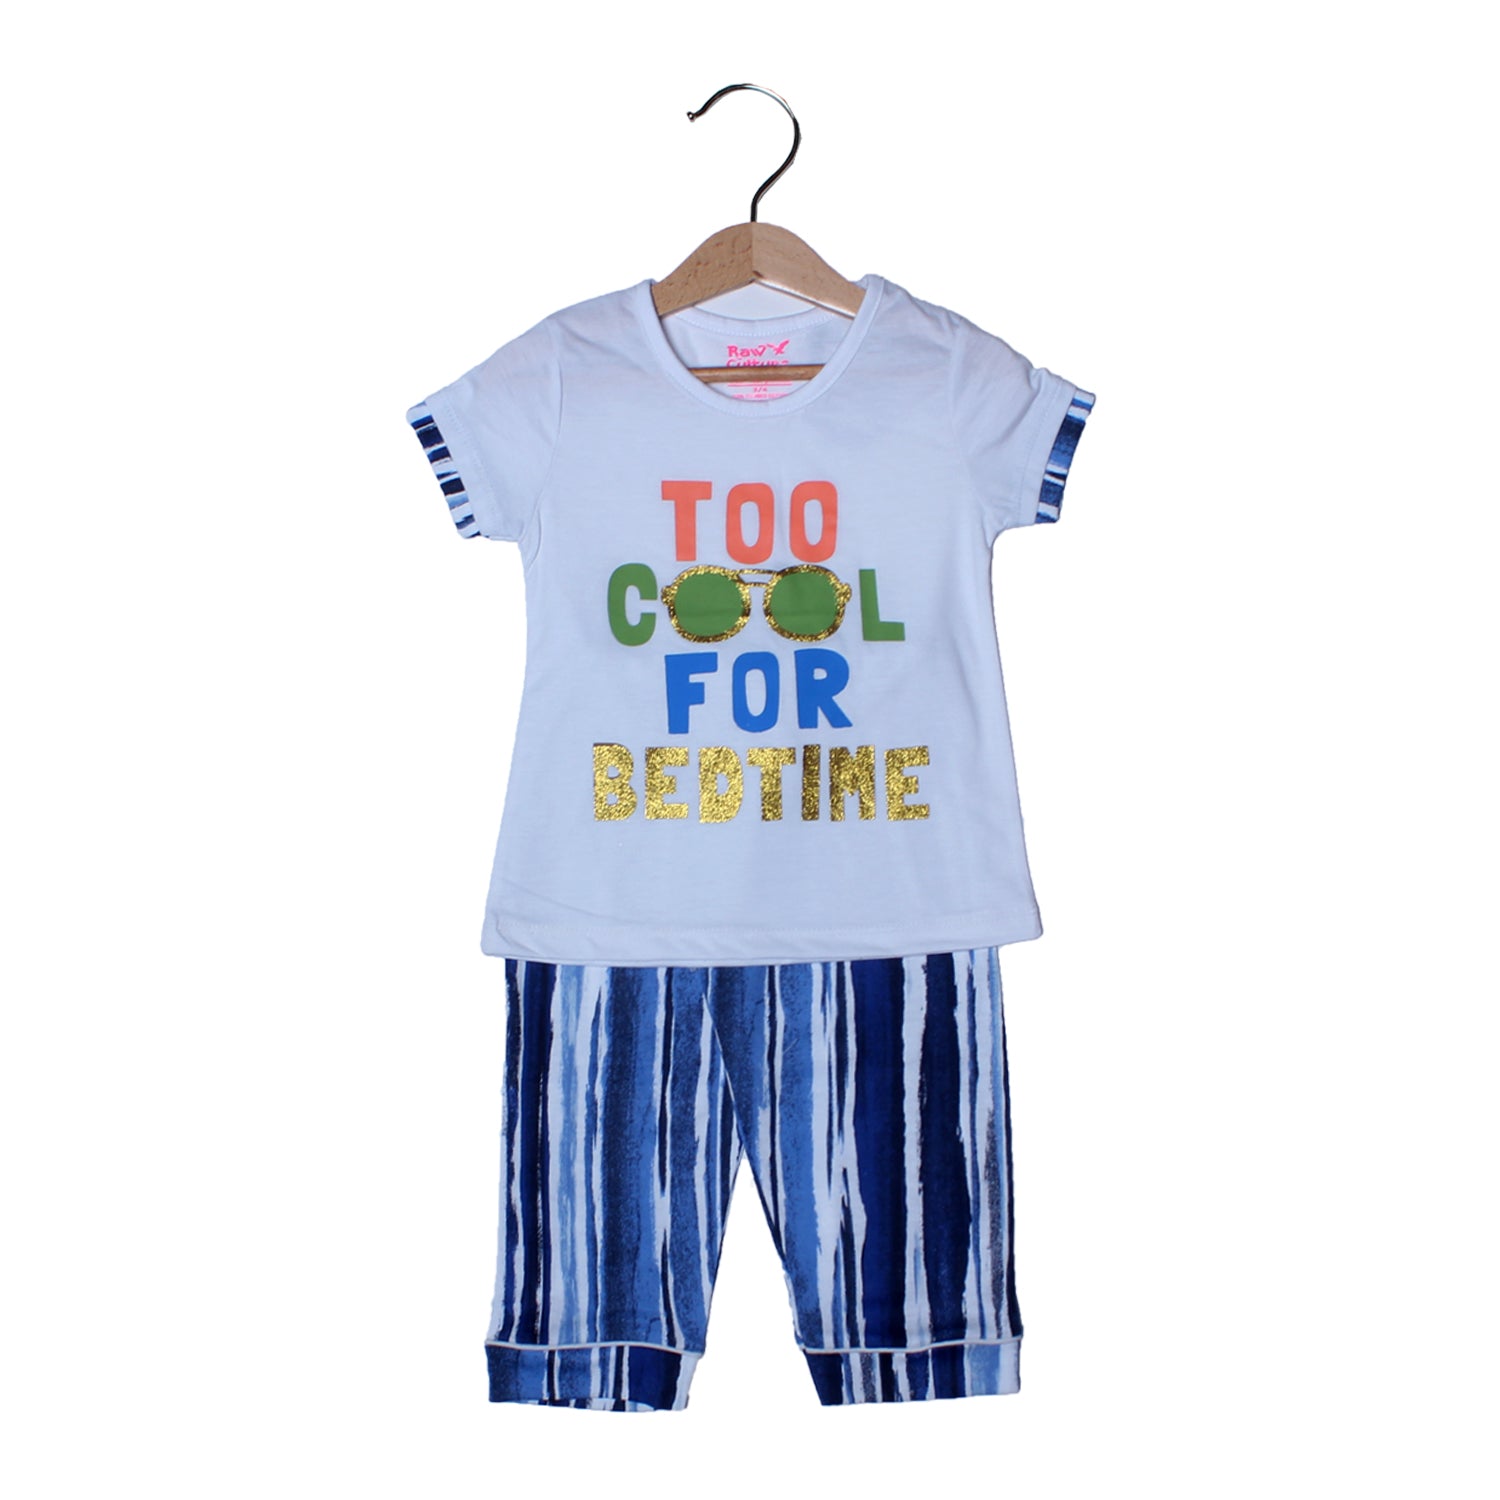 NEW WHITE WITH BLUE TROUSER TOO COOL FOR BEDTIME PRINTED SUIT